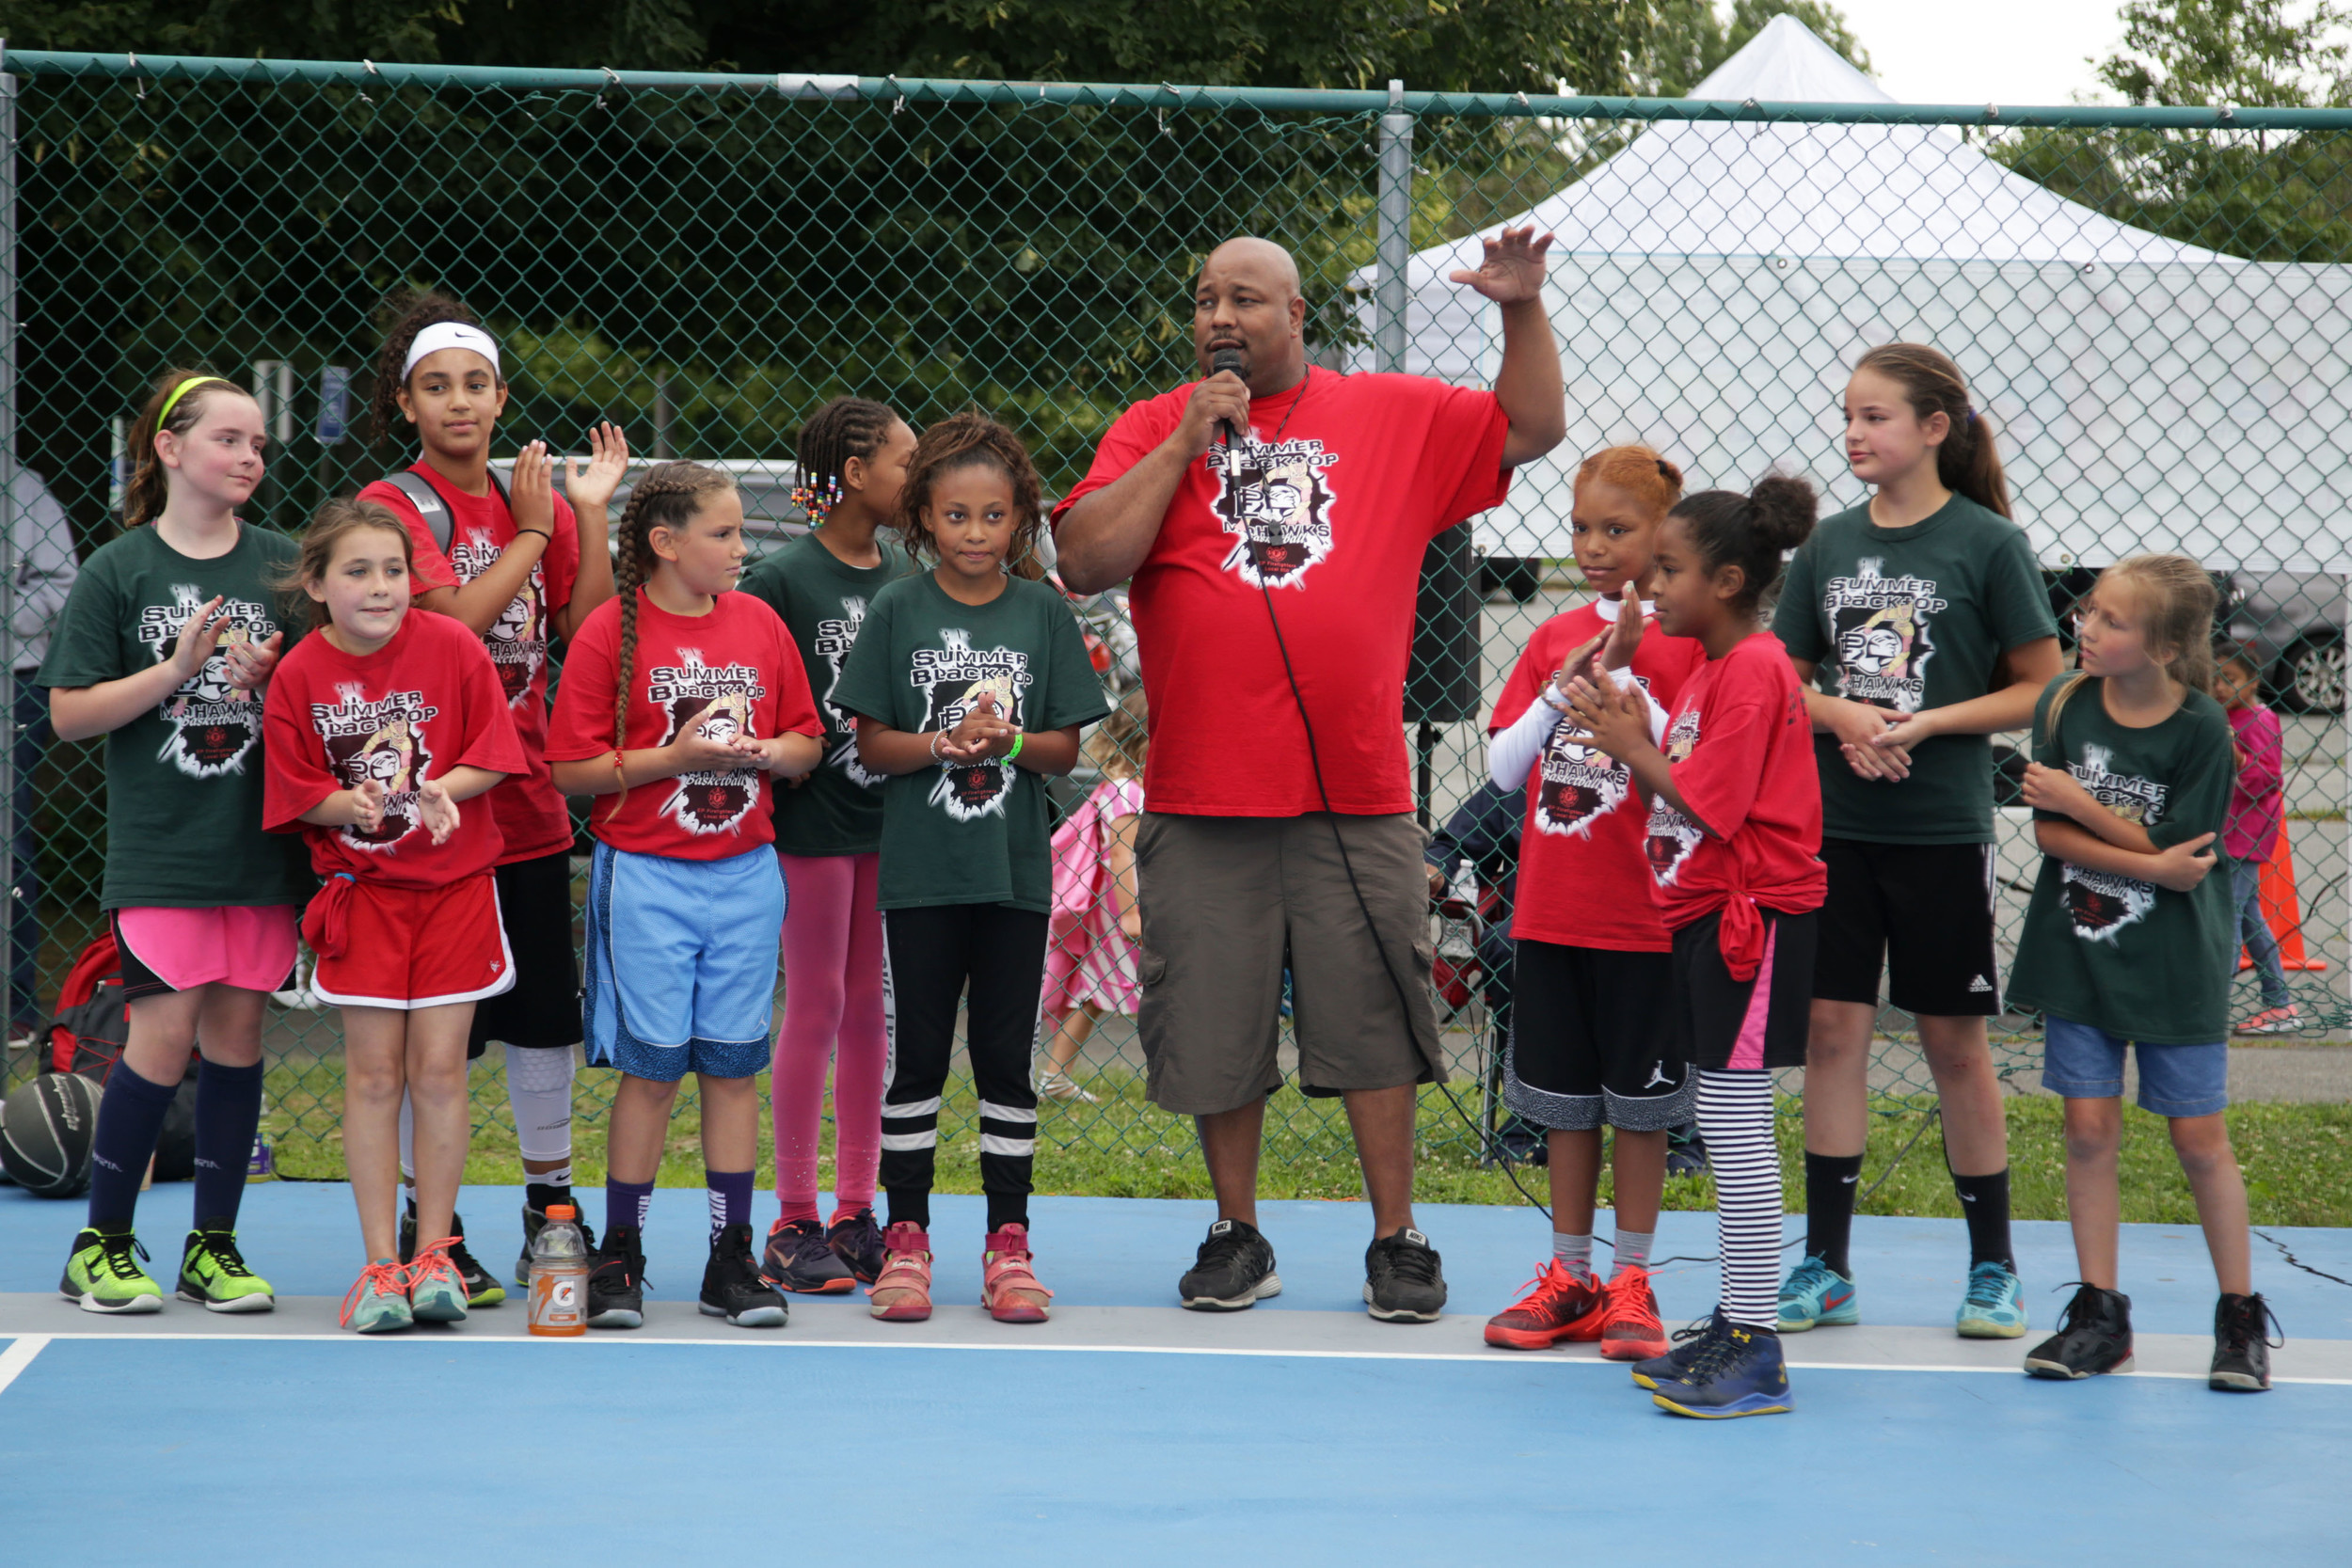 Mohawk President Damion Ramos Awards the playoff trophies to the finalists of the Girls League.